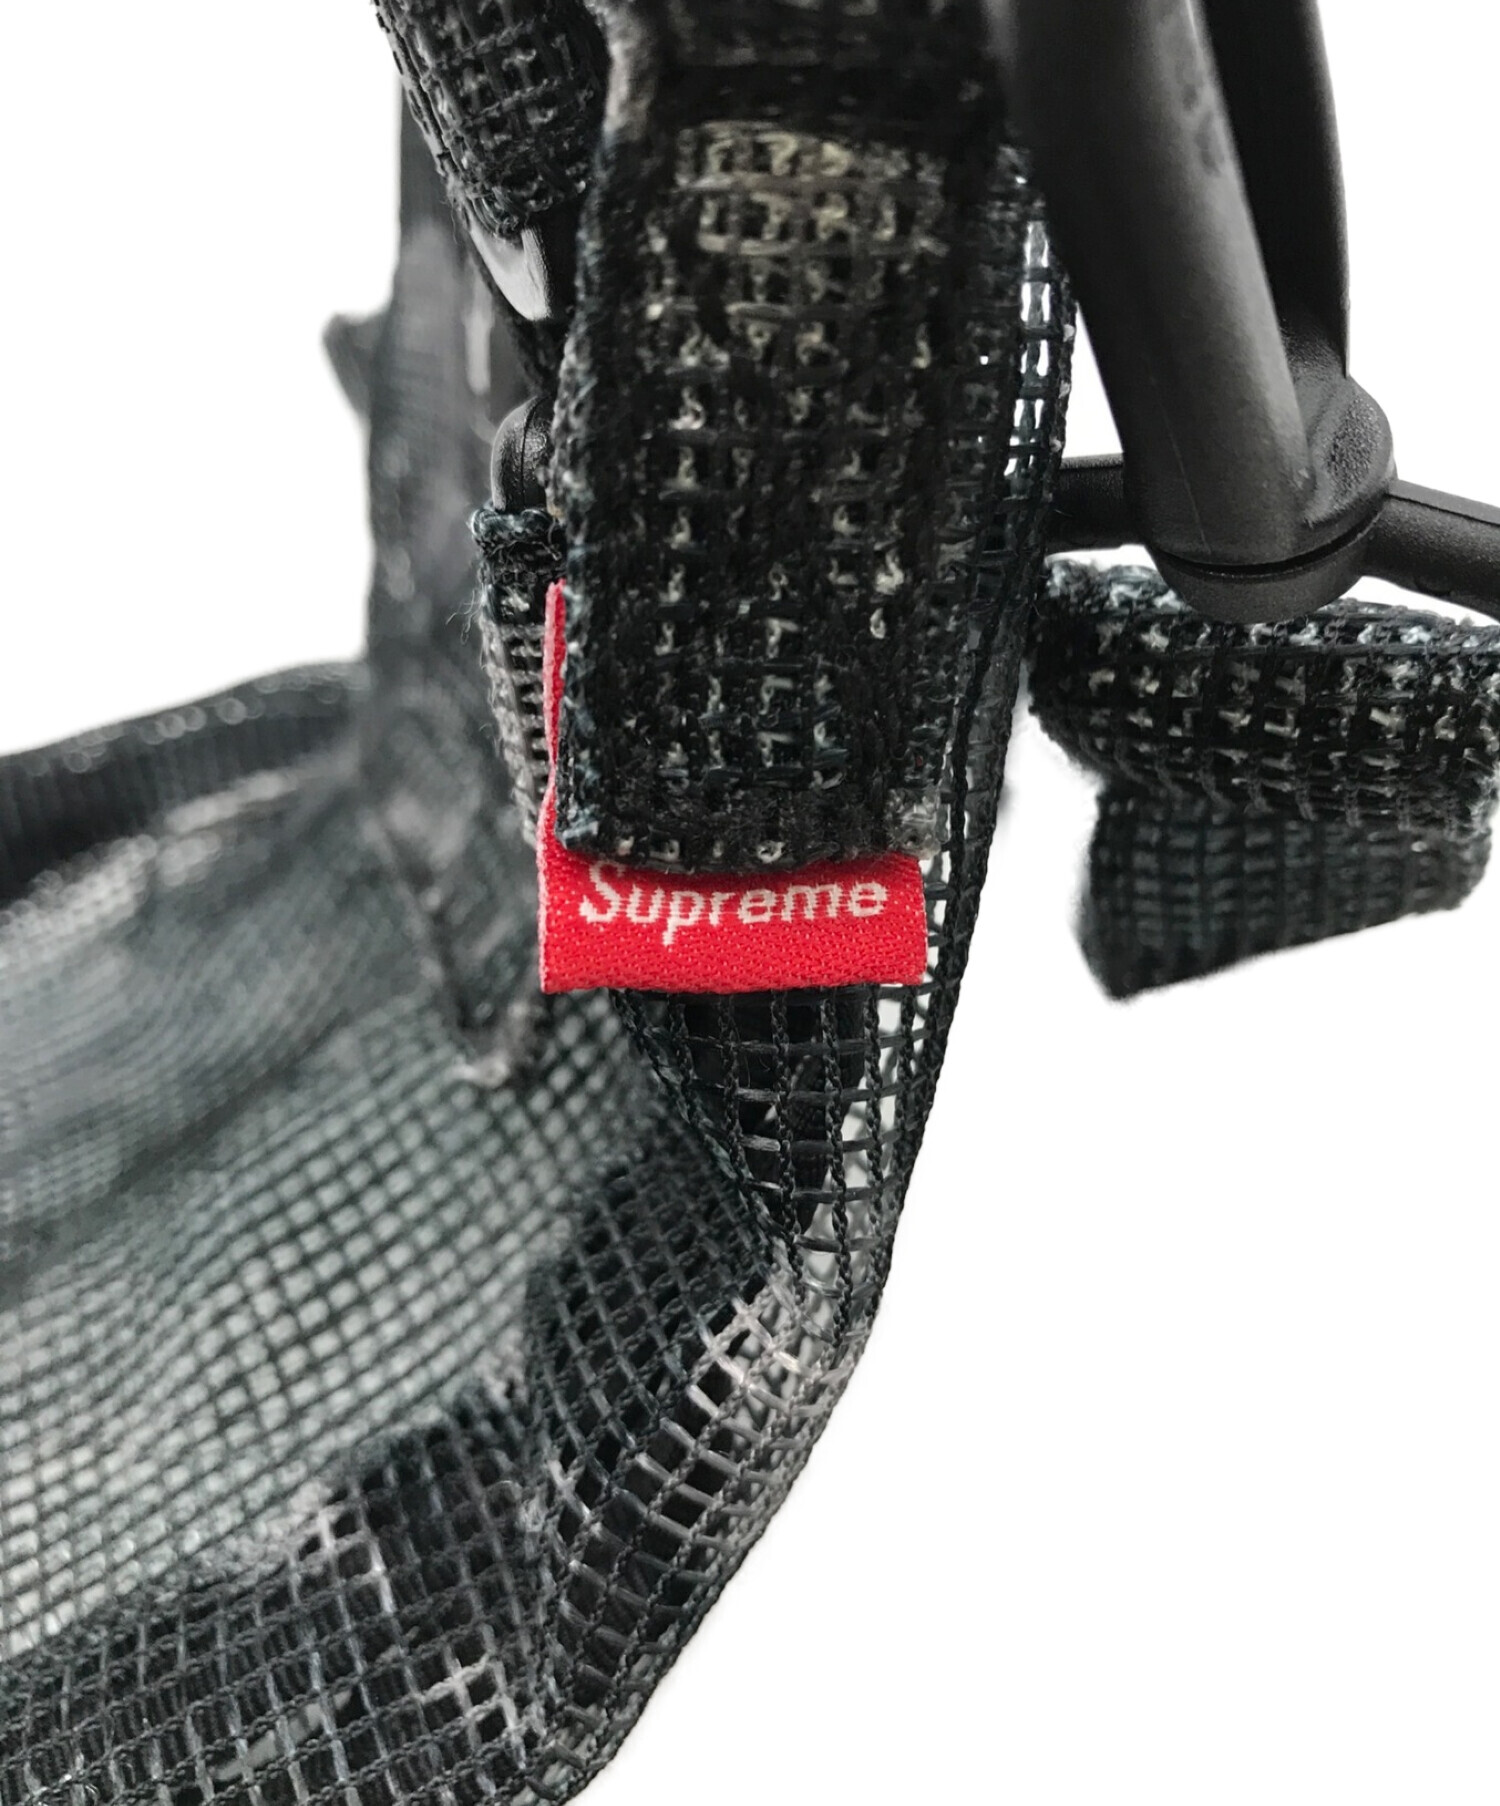 Supreme (シュプリーム) south2 west8 (サウスツー ウエストエイト) Heavy Mesh Game Bag